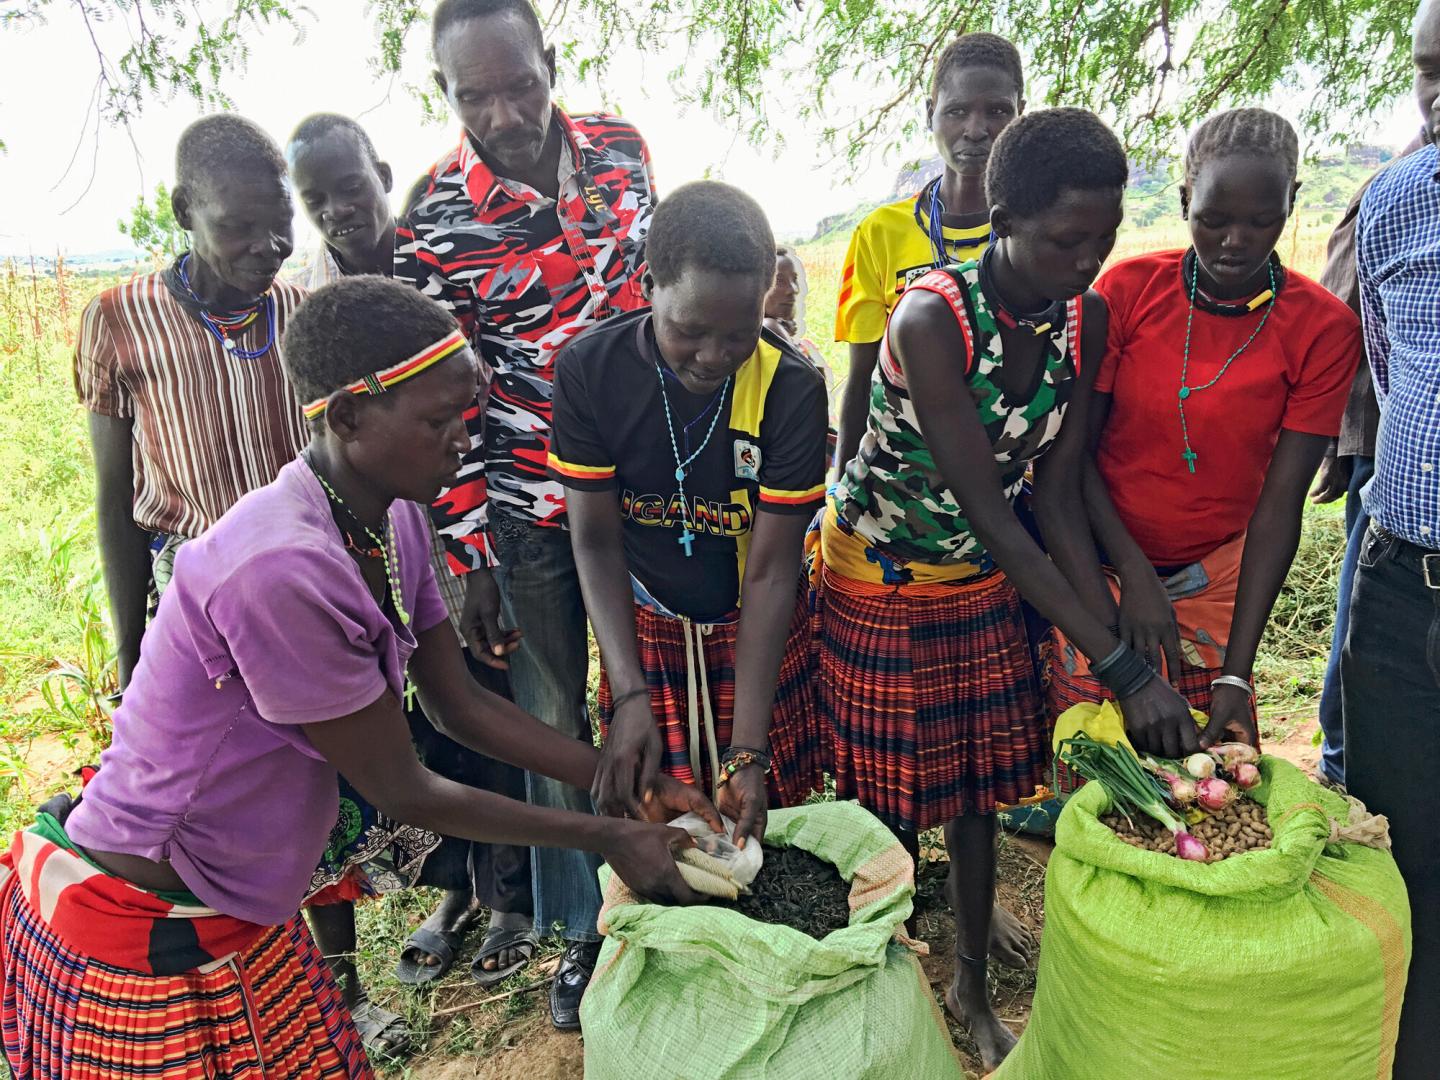 A group in Uganda open large bags of grain and dried beans